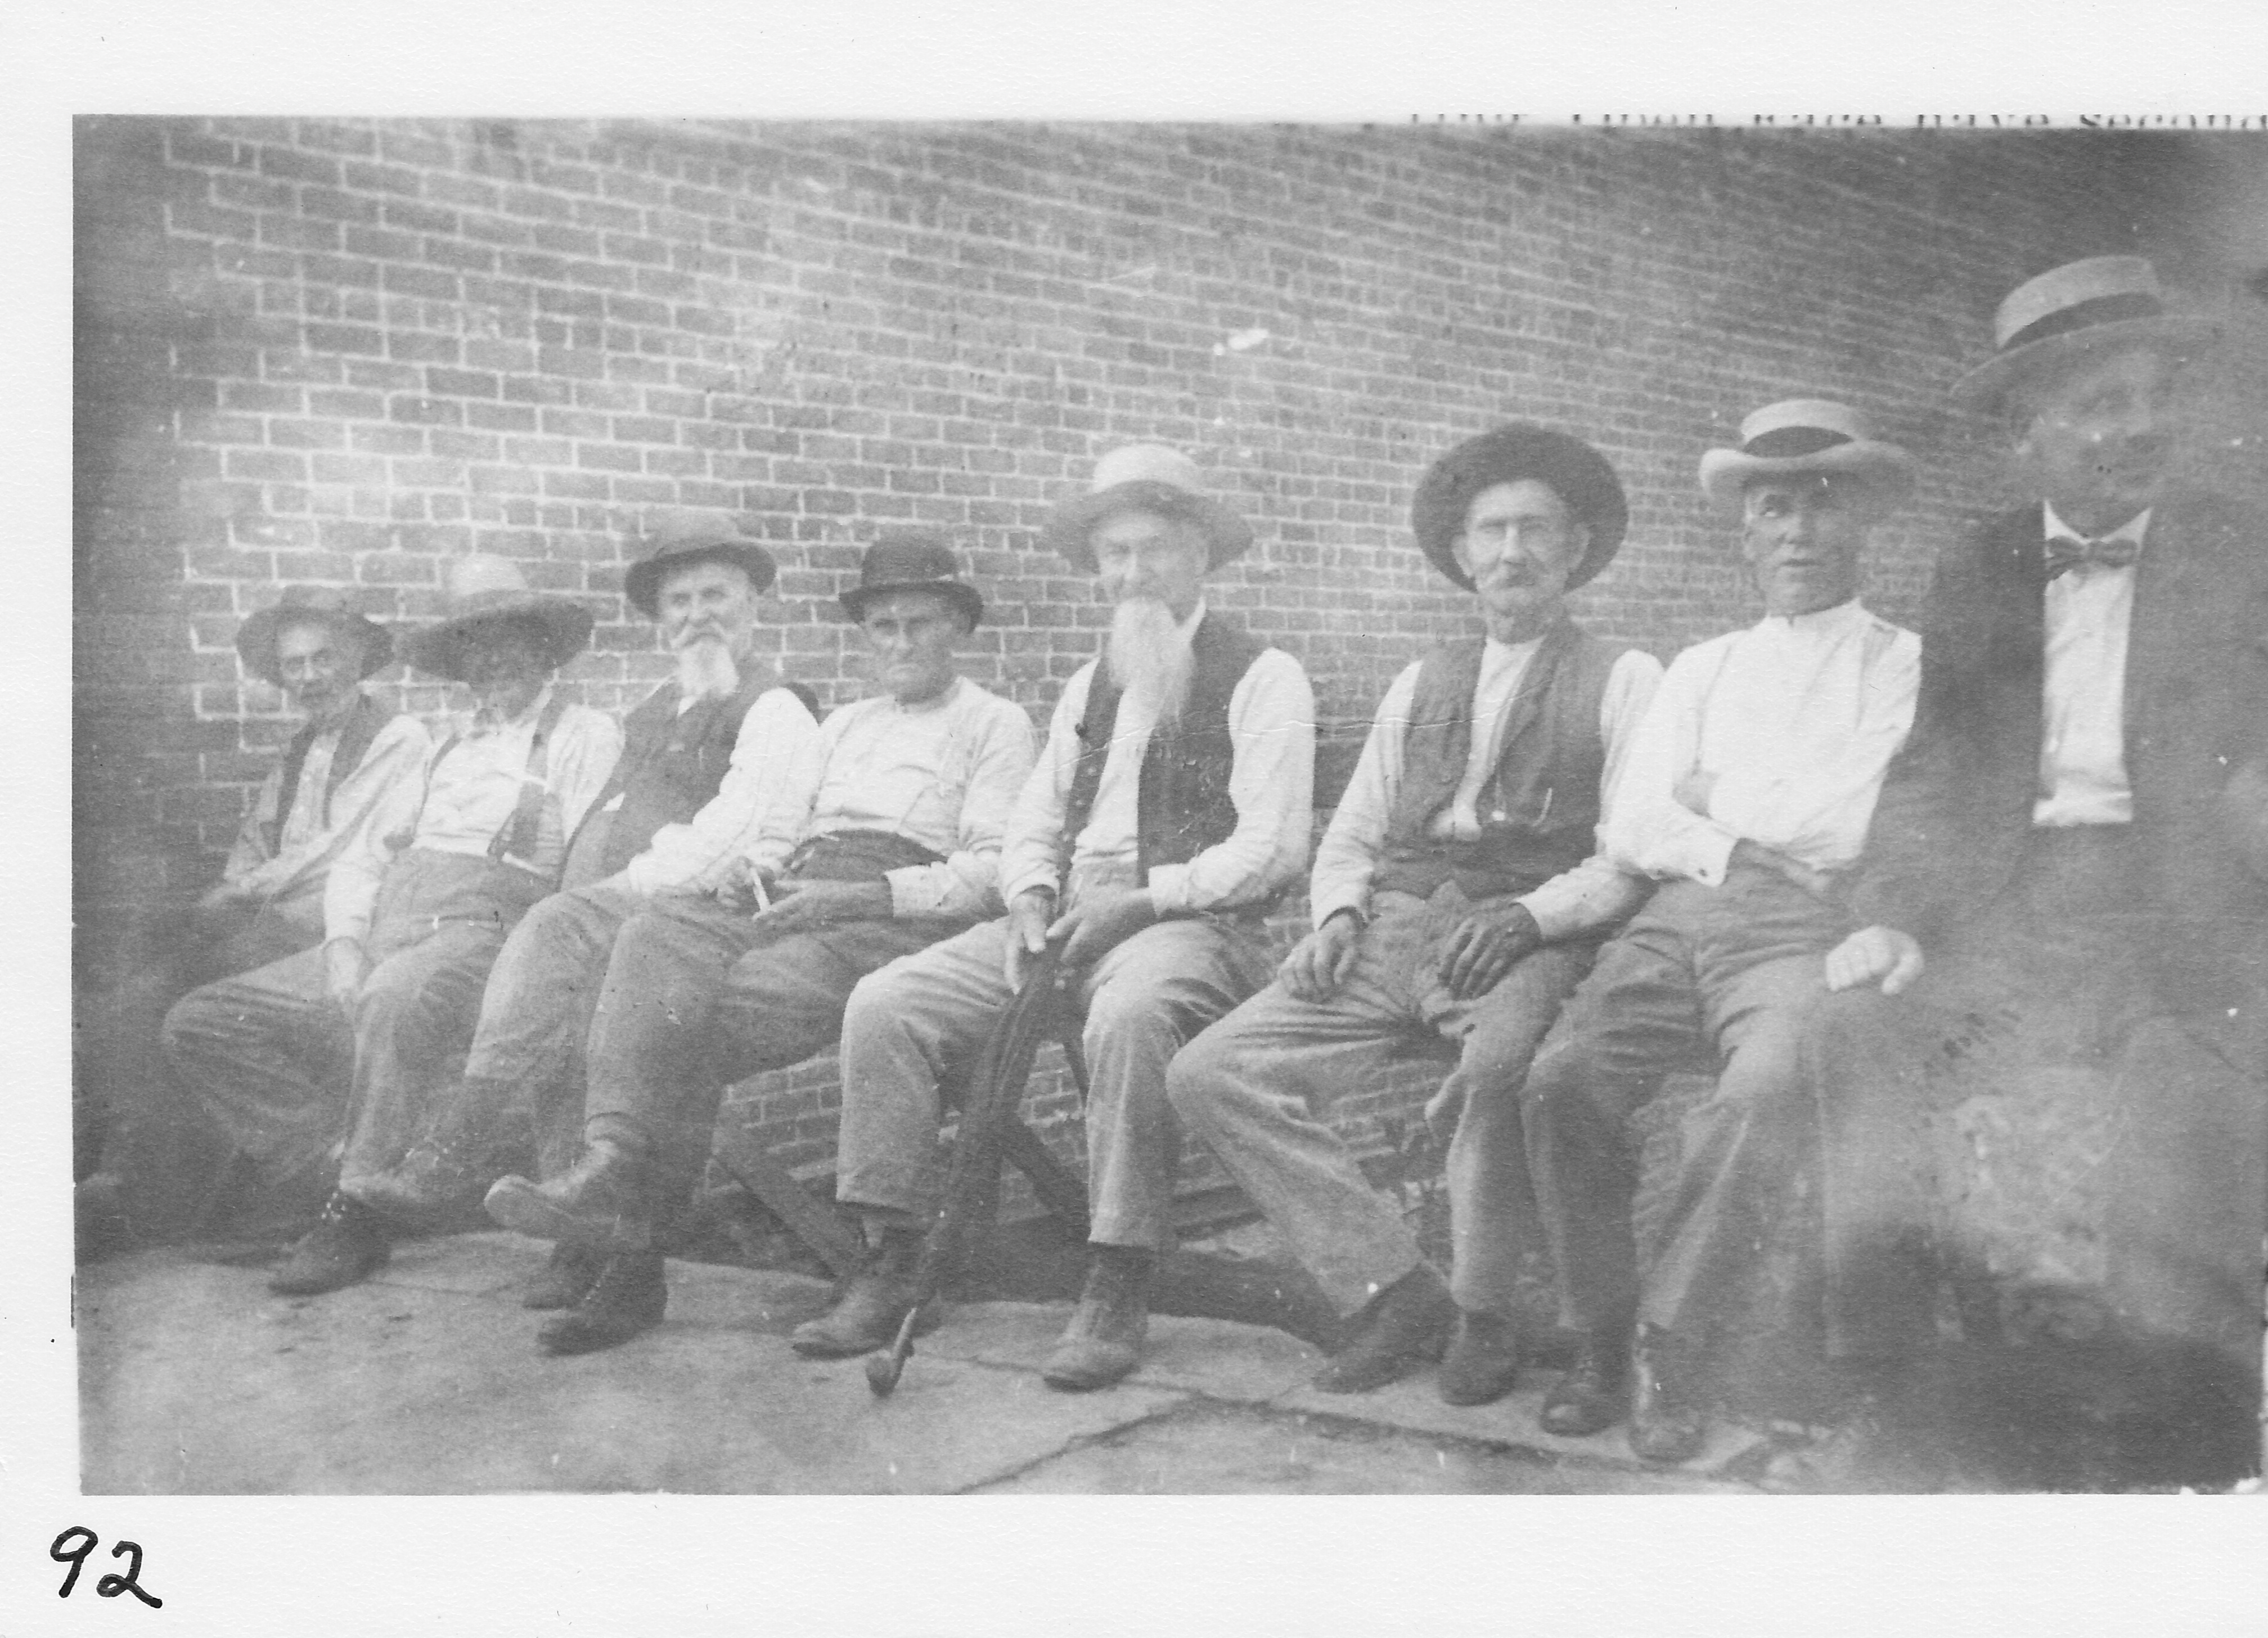 The “Village Senate.”  North side of West Main Street, east of Seebald Building. A gathering of some “cronies” on a warm spring day.  Site is an open area between corner store and Allen Jewelry. Fire in January 1912 destroyed previous building. Civil War veteran John Hanna (father of Olive Stephenson) – third from left. Civil War veteran William Onweller (father of Florence Anderson) – fourth from left.  Sam Humphrey, retired merchant, is shown second from left.  Photo taken between 1914 and 1915.